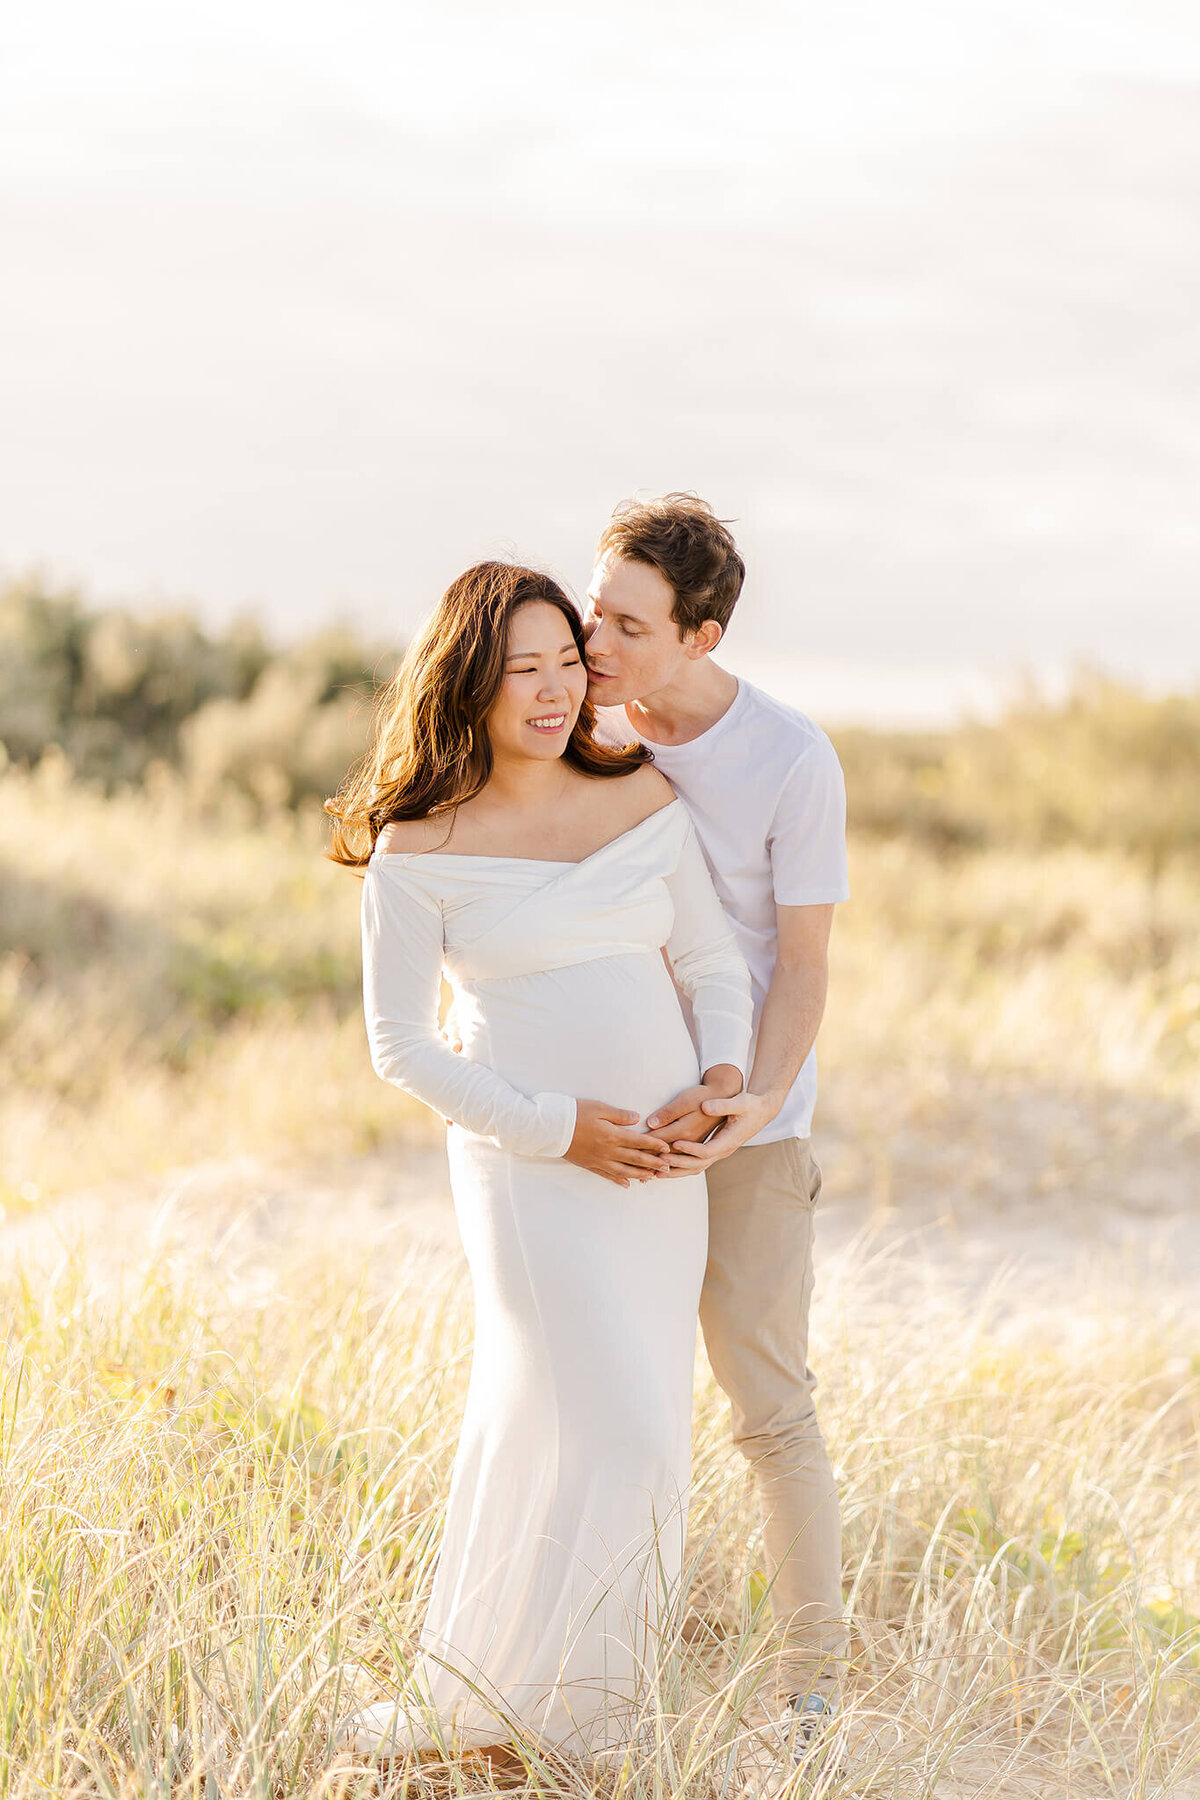 Man whispering in woman's ear making her laugh during maternity photoshoot in Gold Coast